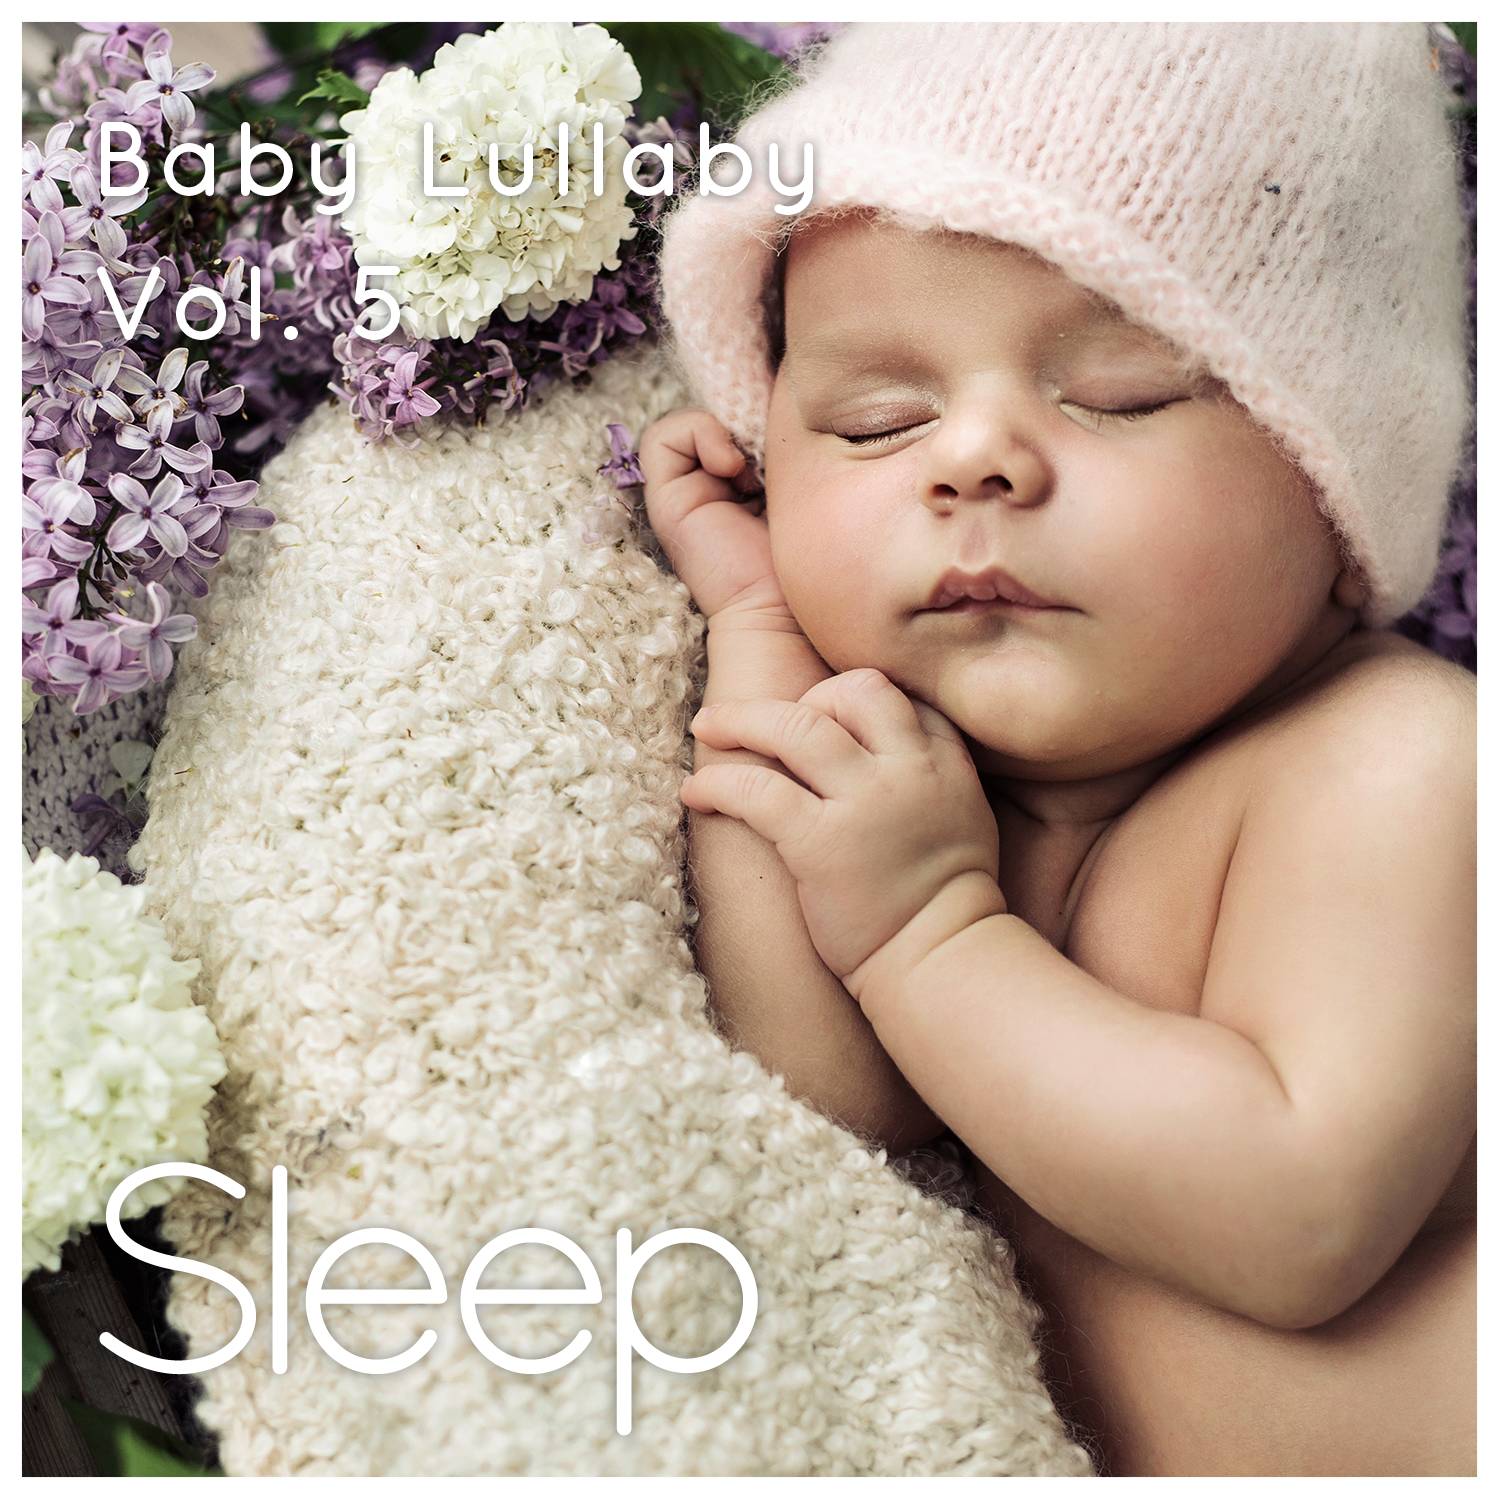 Baby Sleep Ambient Lullaby, Pt. 22